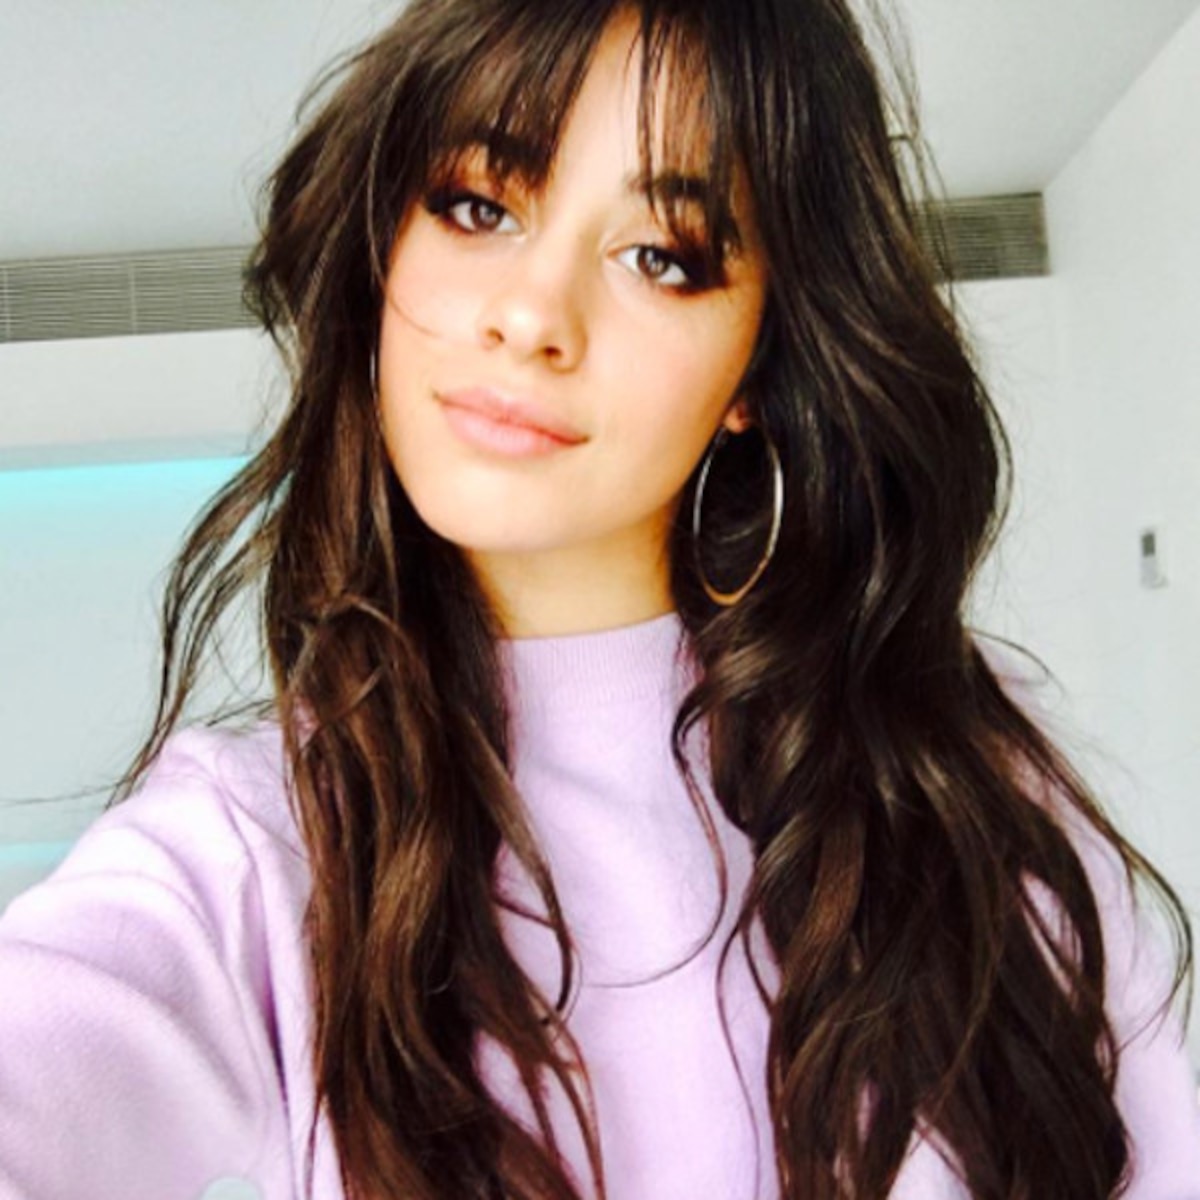 How Camila Cabello's Beauty Routine Changed Since Going Solo - E! Online